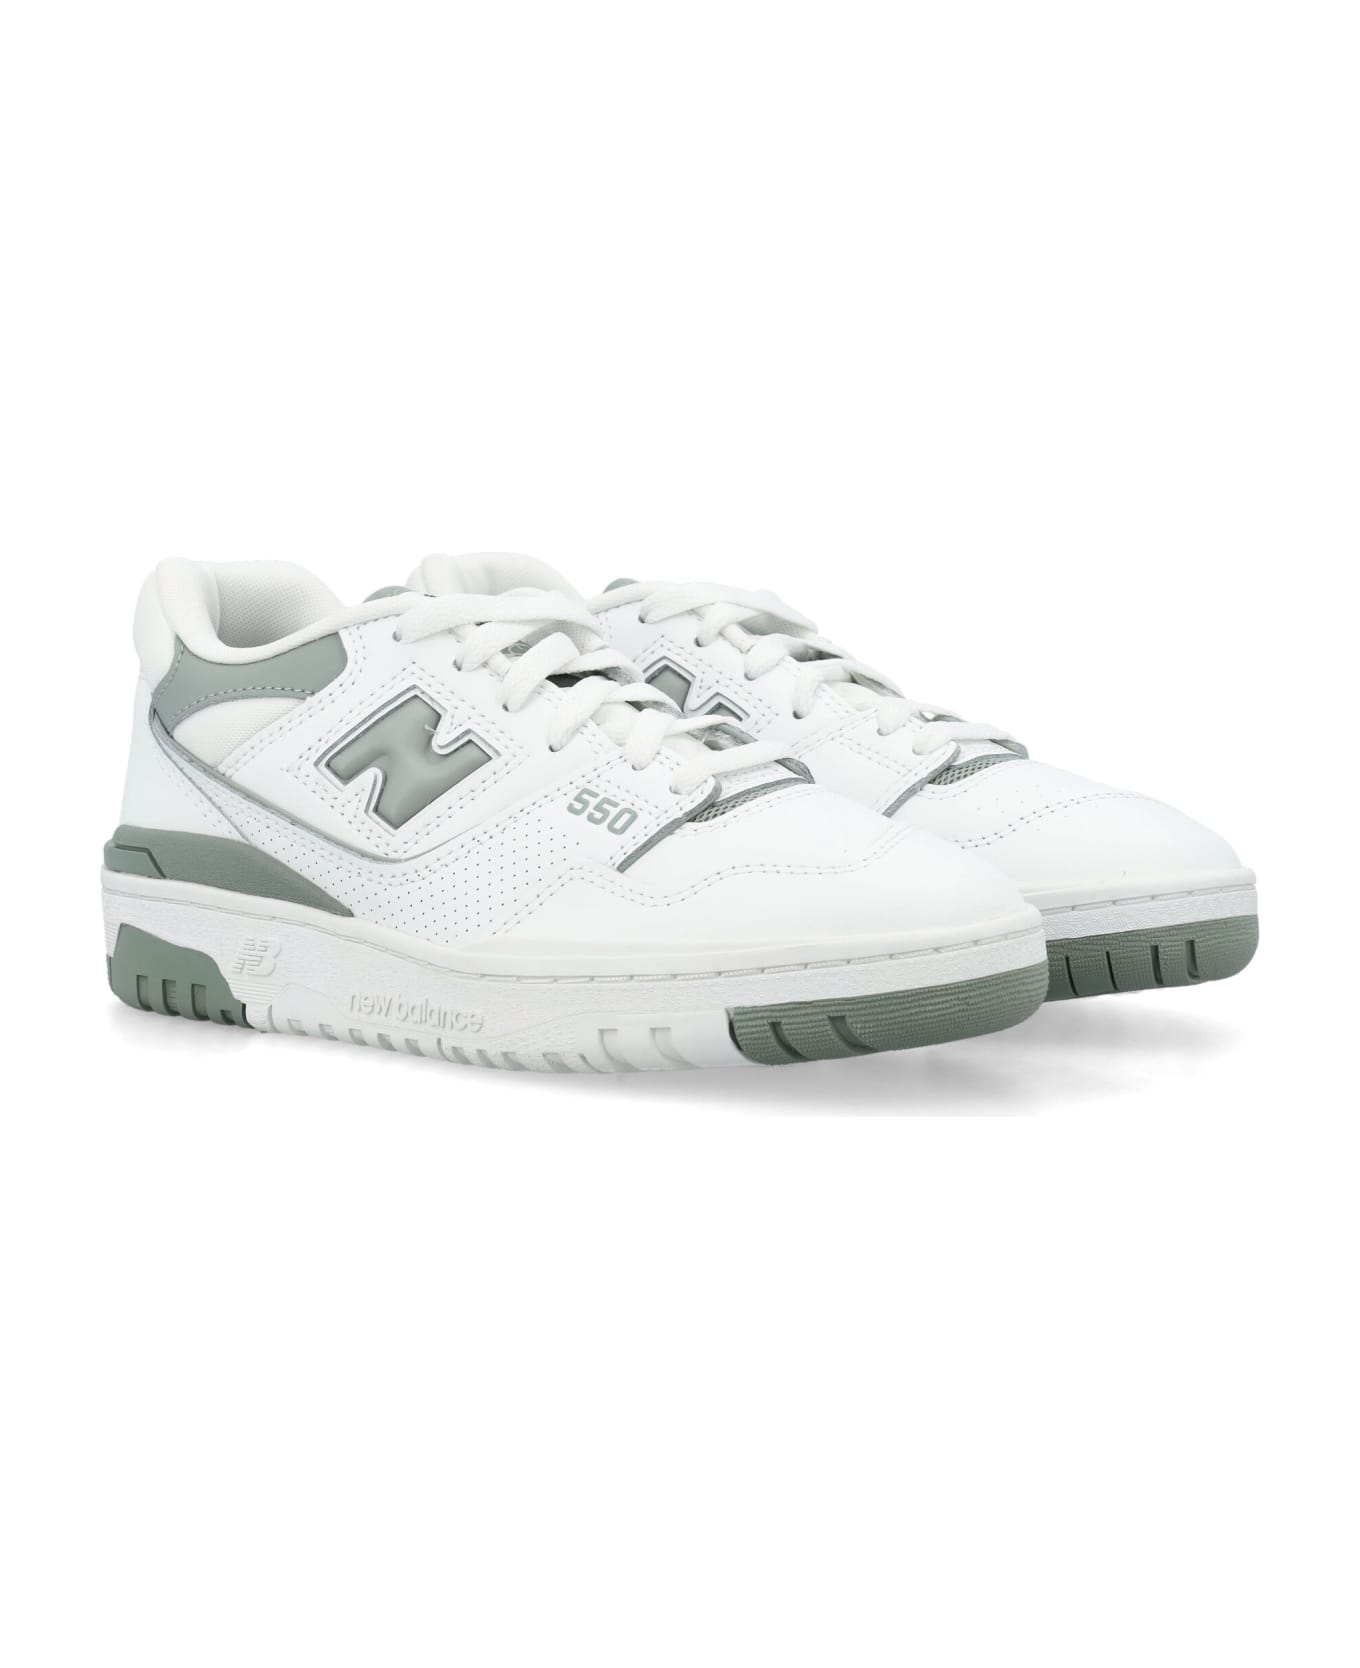 New Balance 550 Woman's Sneakers - WHITE GREEN